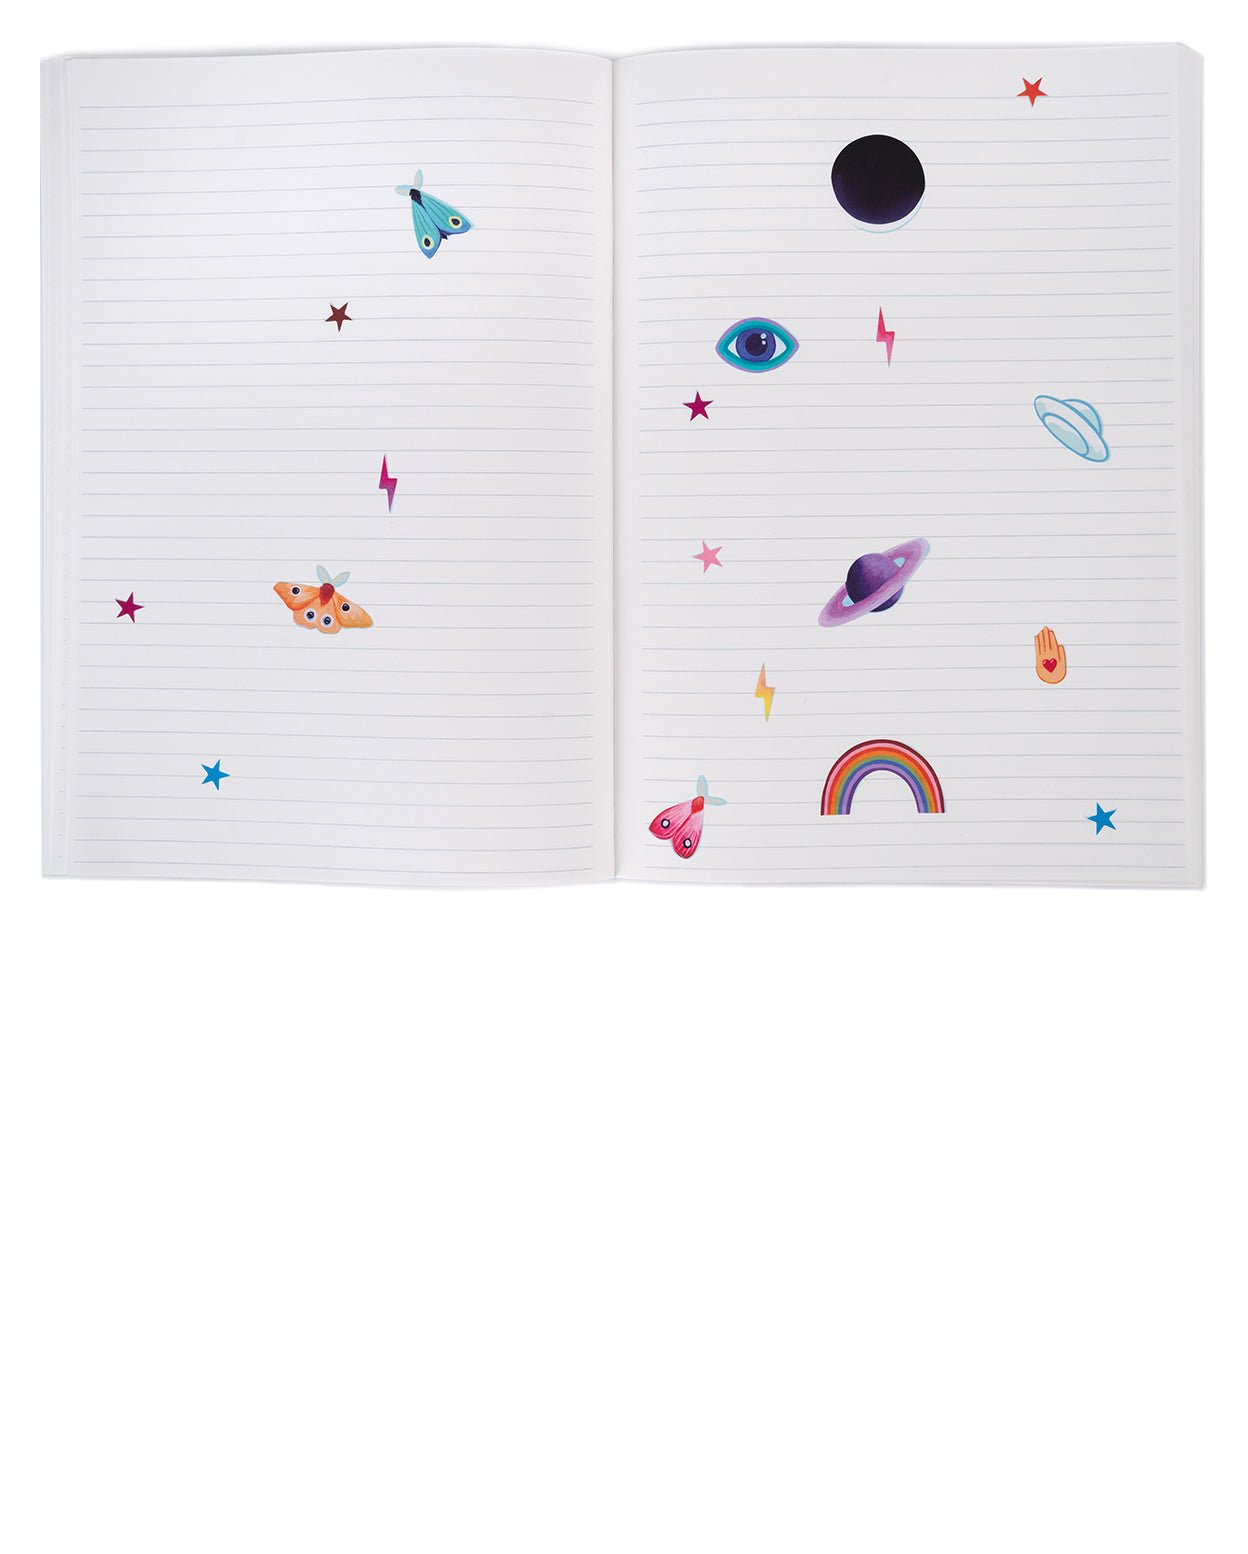 Lined paper with neon icons stickers.